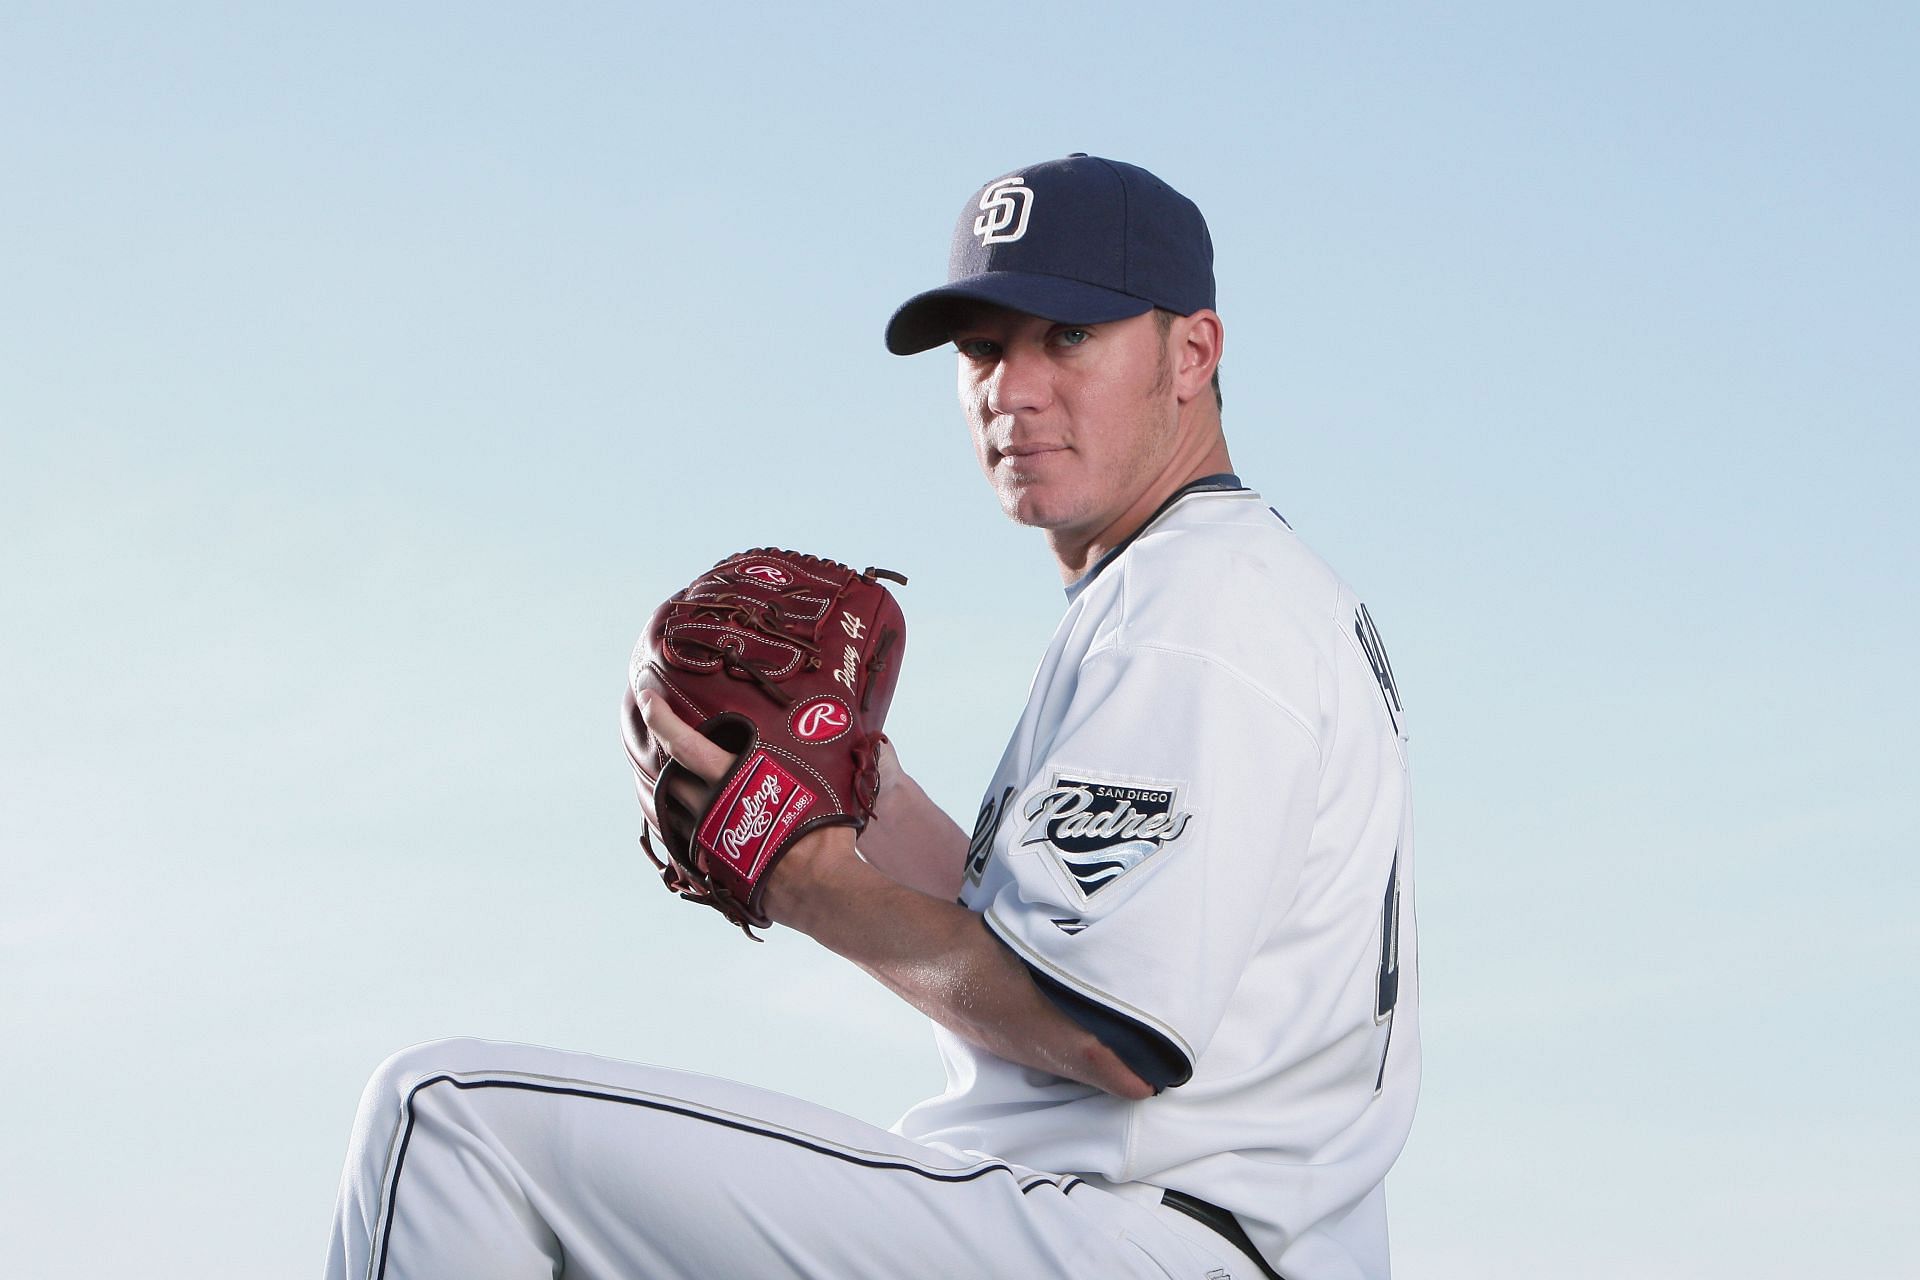 A look back at Jake Peavy's career with the San Diego Padres